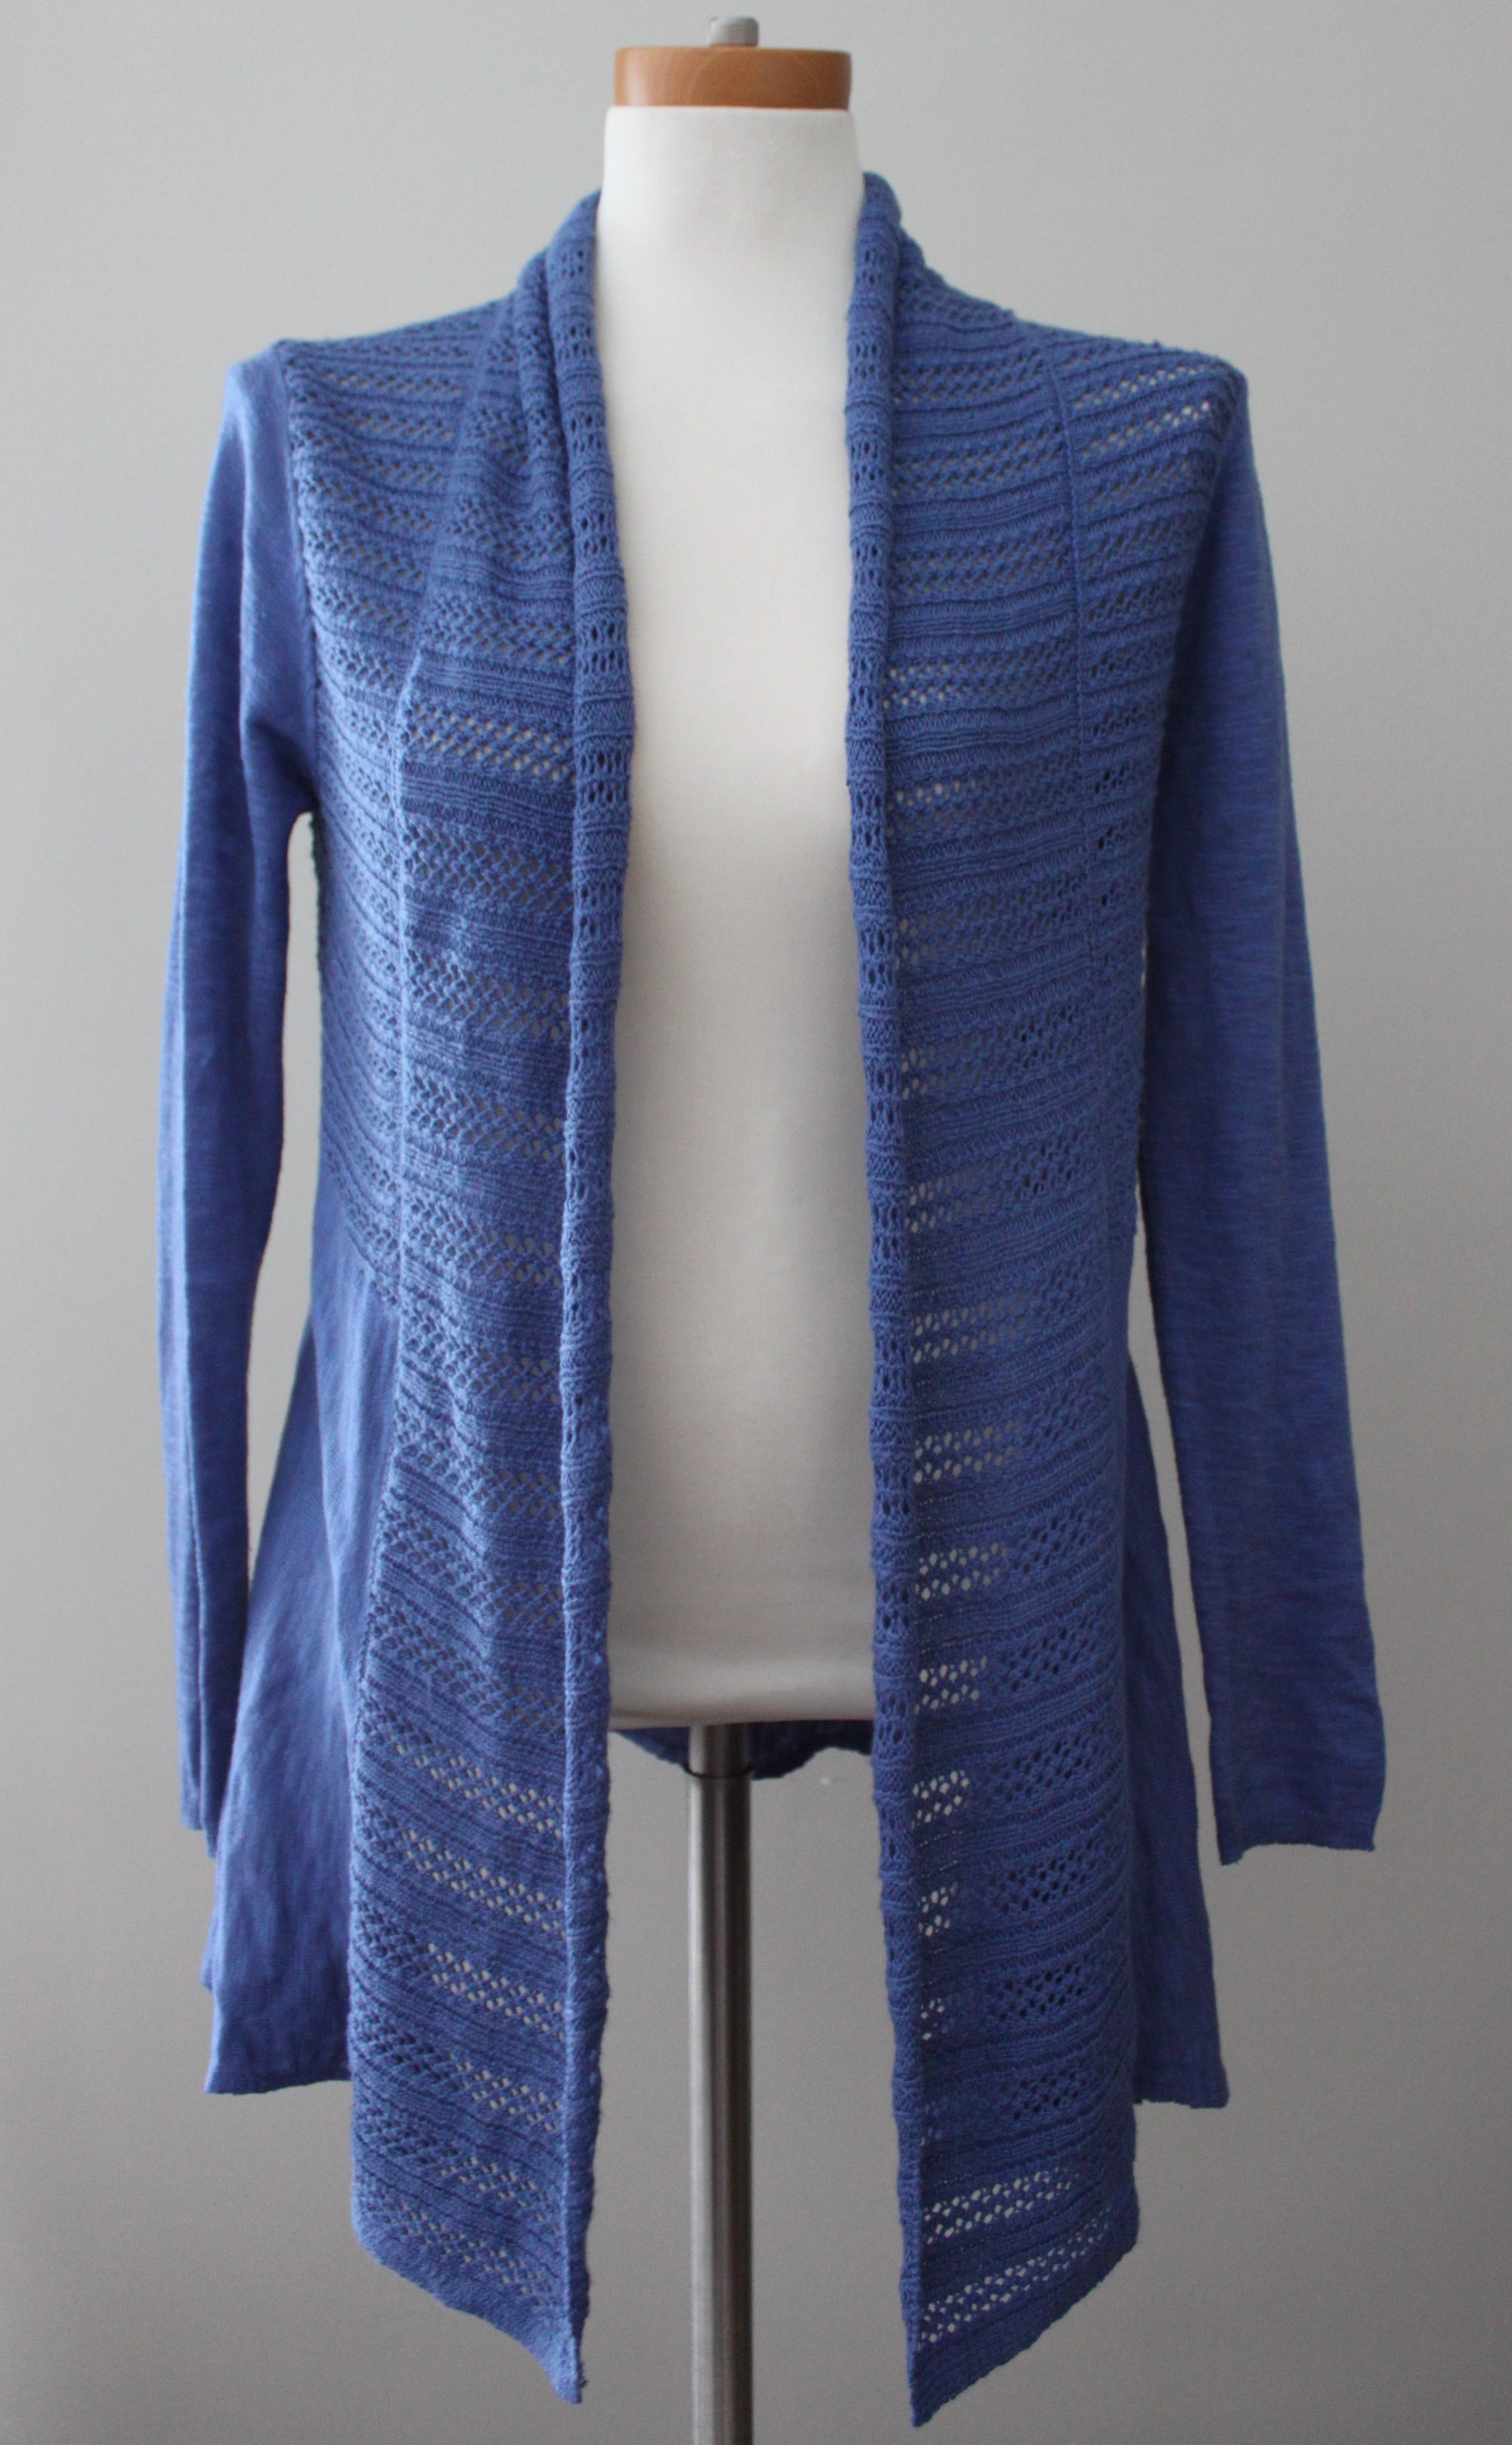 SMALL ﻿SKIES ARE BLUE﻿ Cool Summer blue cardigan sweater